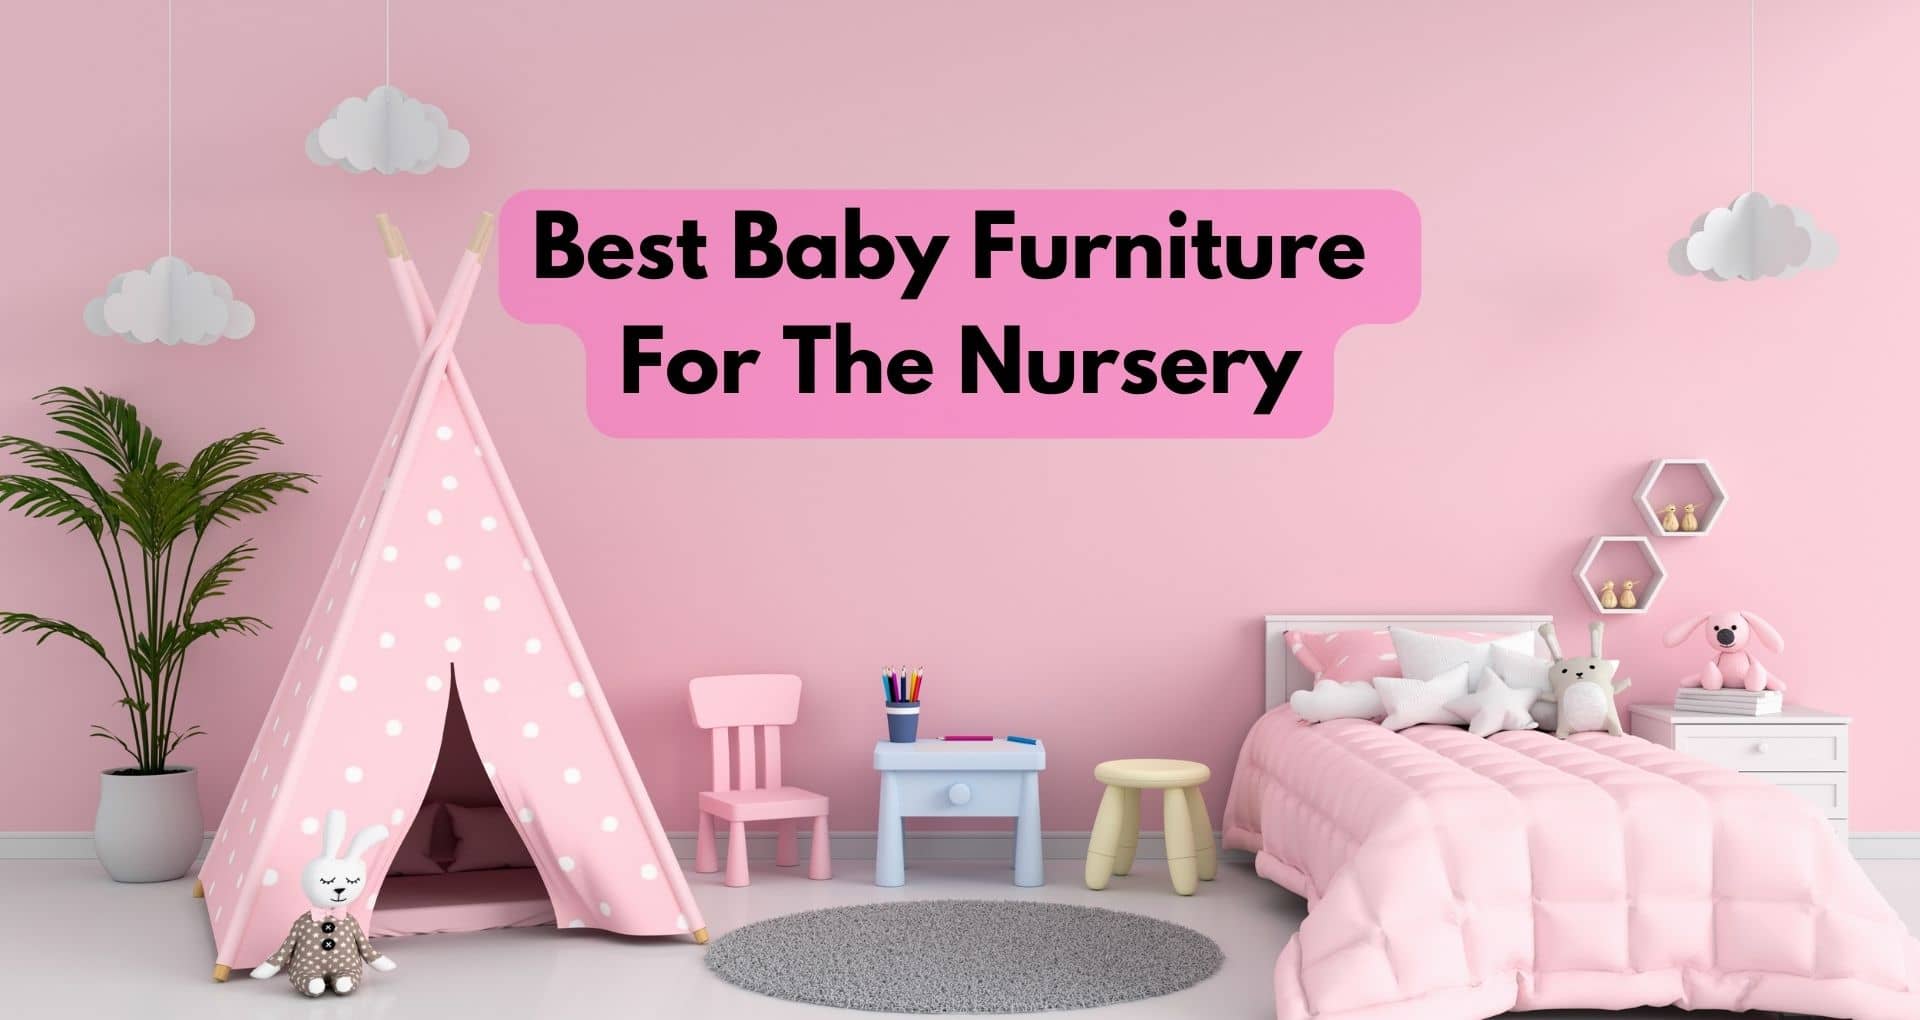 How To Choose The Best Baby Furniture For The Nursery?